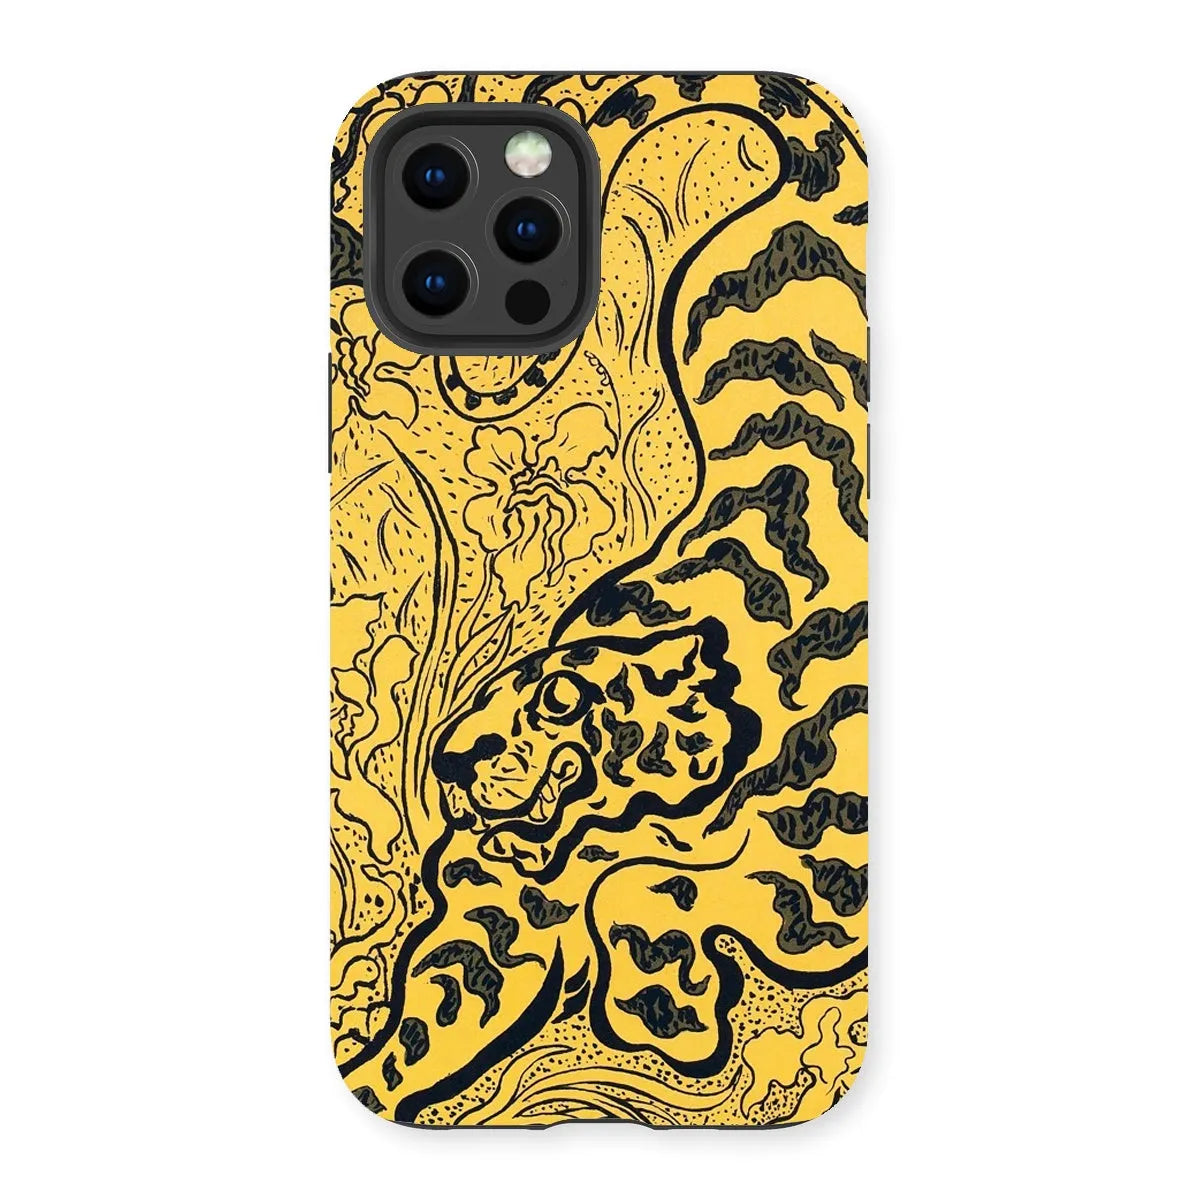 Tiger In The Jungle - Graphic Art Phone Case - Paul Ranson - Iphone 13 Pro / Matte - Mobile Phone Cases - Aesthetic Art